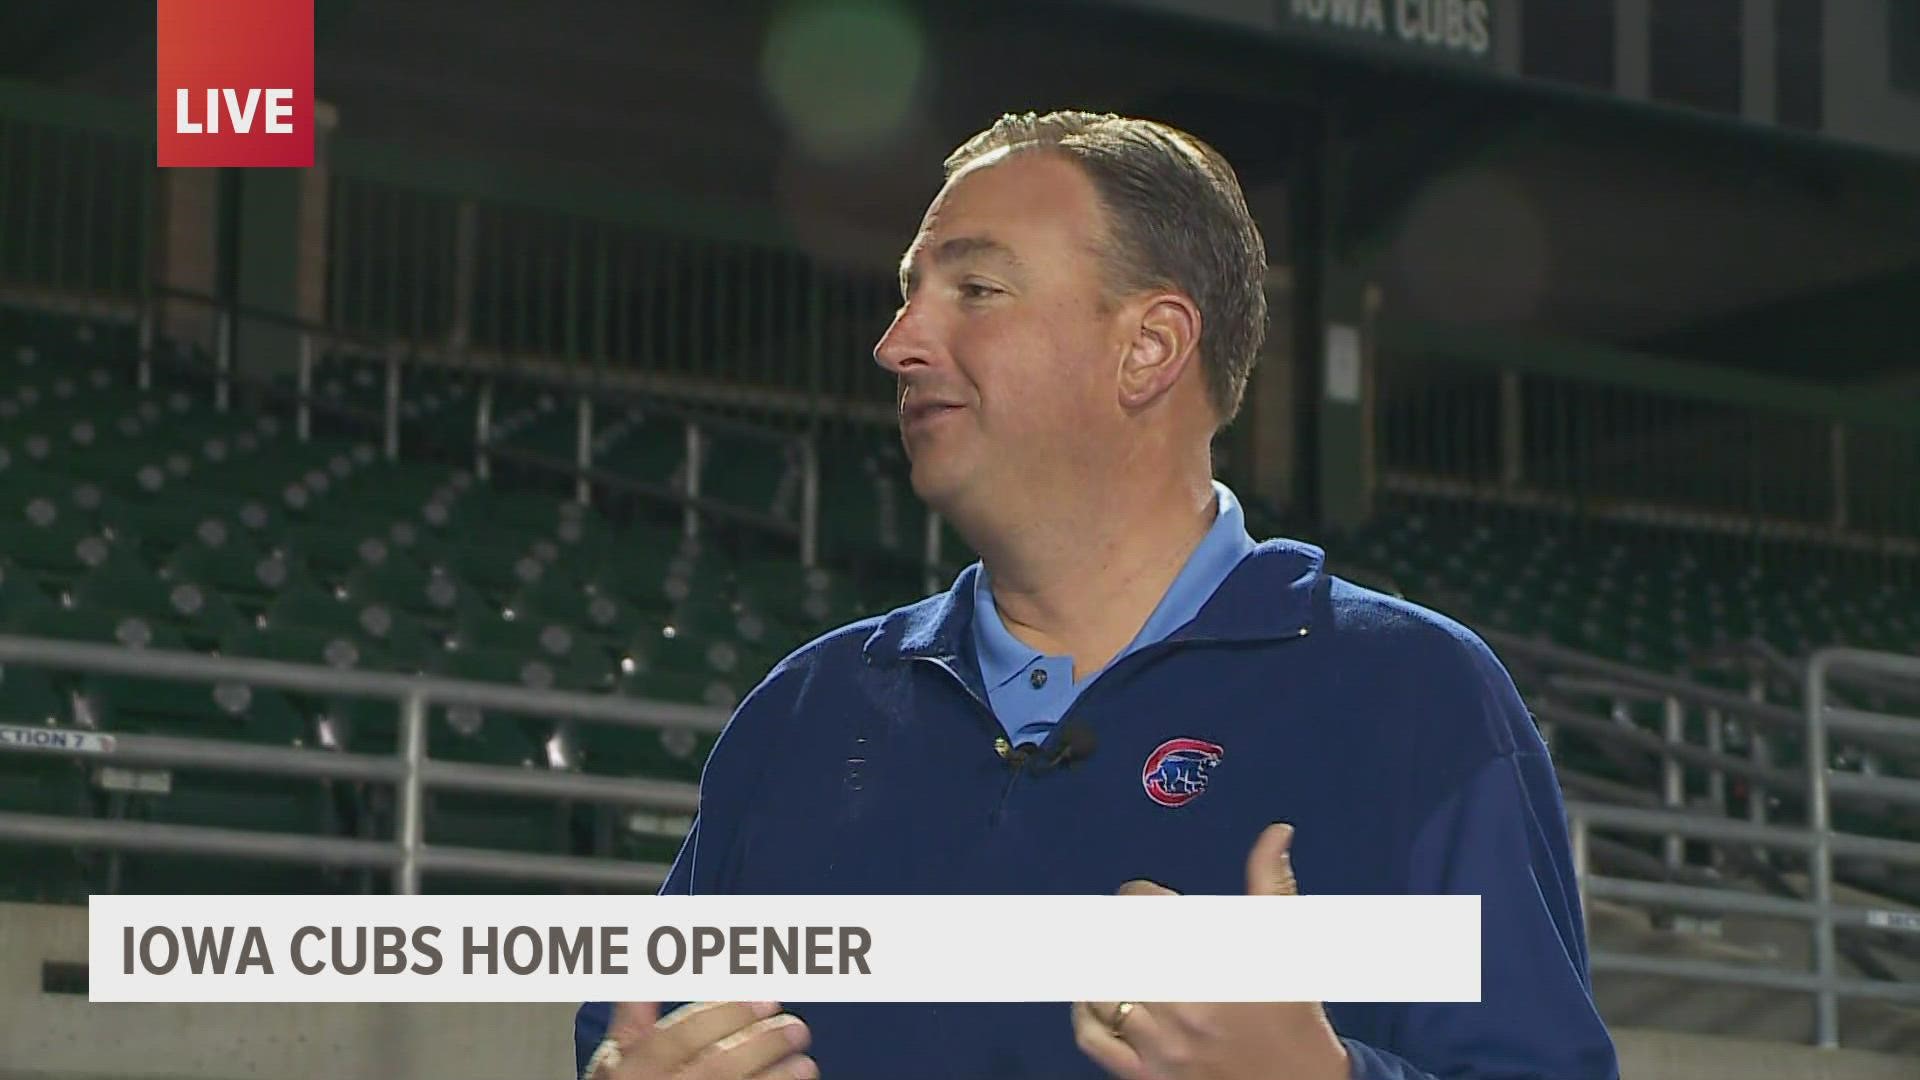 Randy Weoher, Vice President of the Iowa Cubs, shares what fans can expect this season.